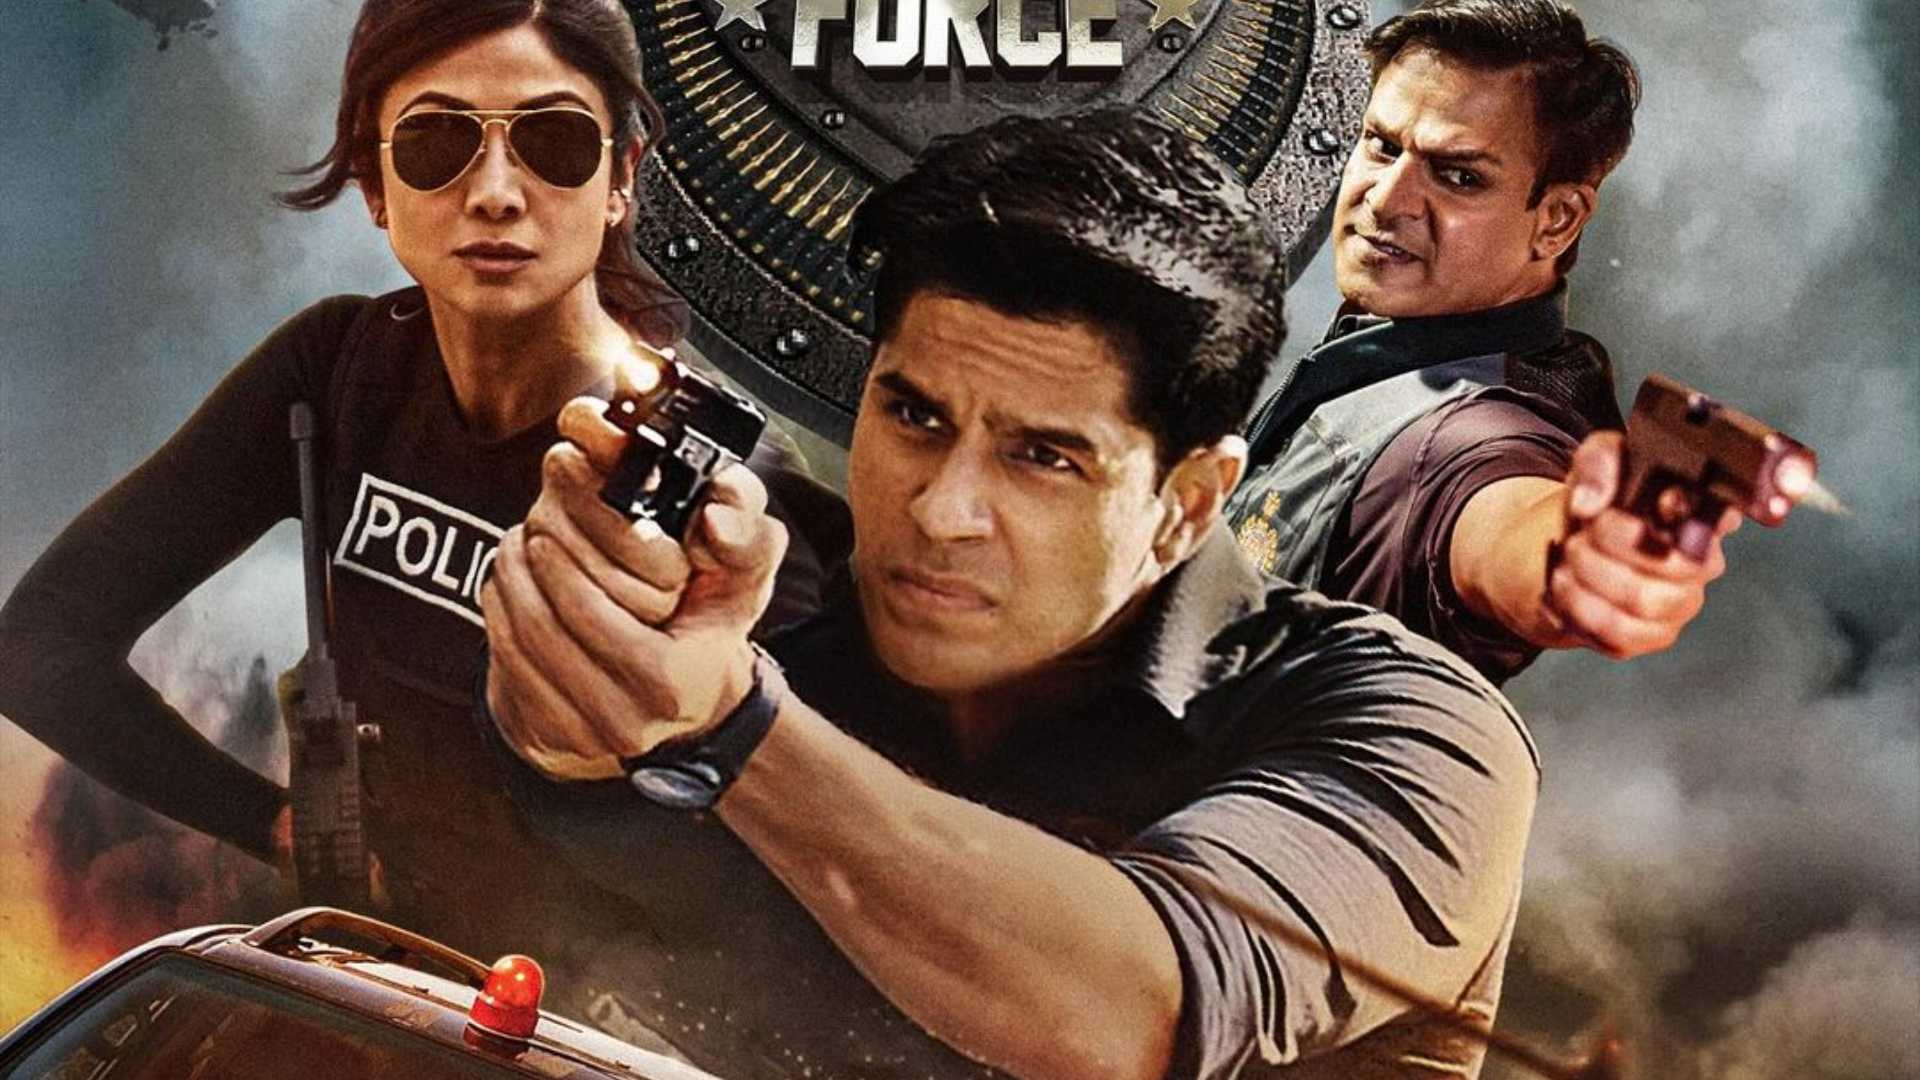 Indian Police Force Twitter review: Sidharth Malhotra’s cop series fails to impress, netizens call it 'bland & boring'